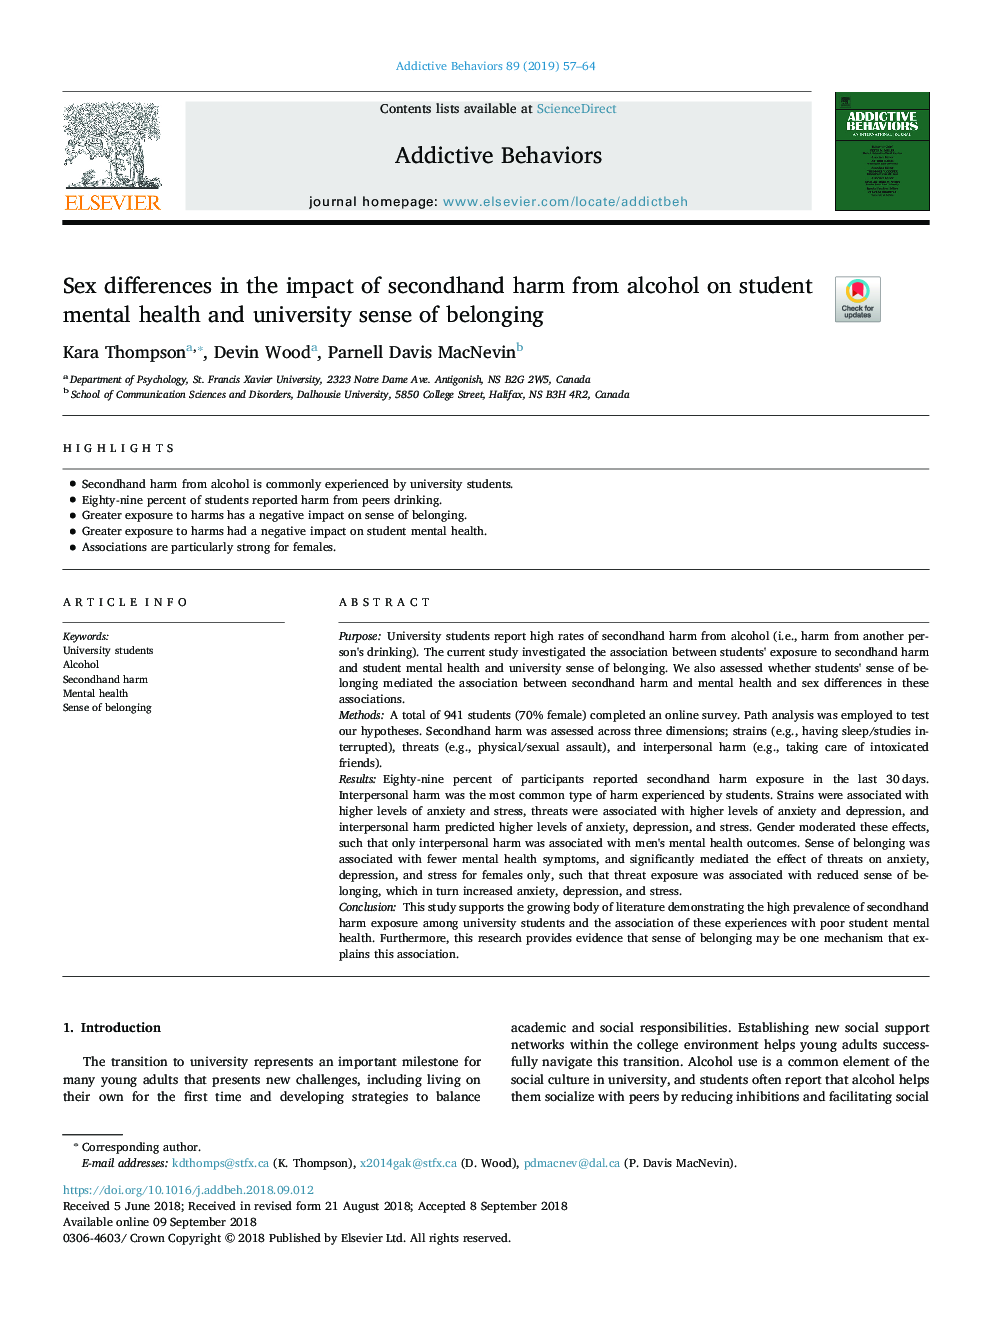 Sex differences in the impact of secondhand harm from alcohol on student mental health and university sense of belonging